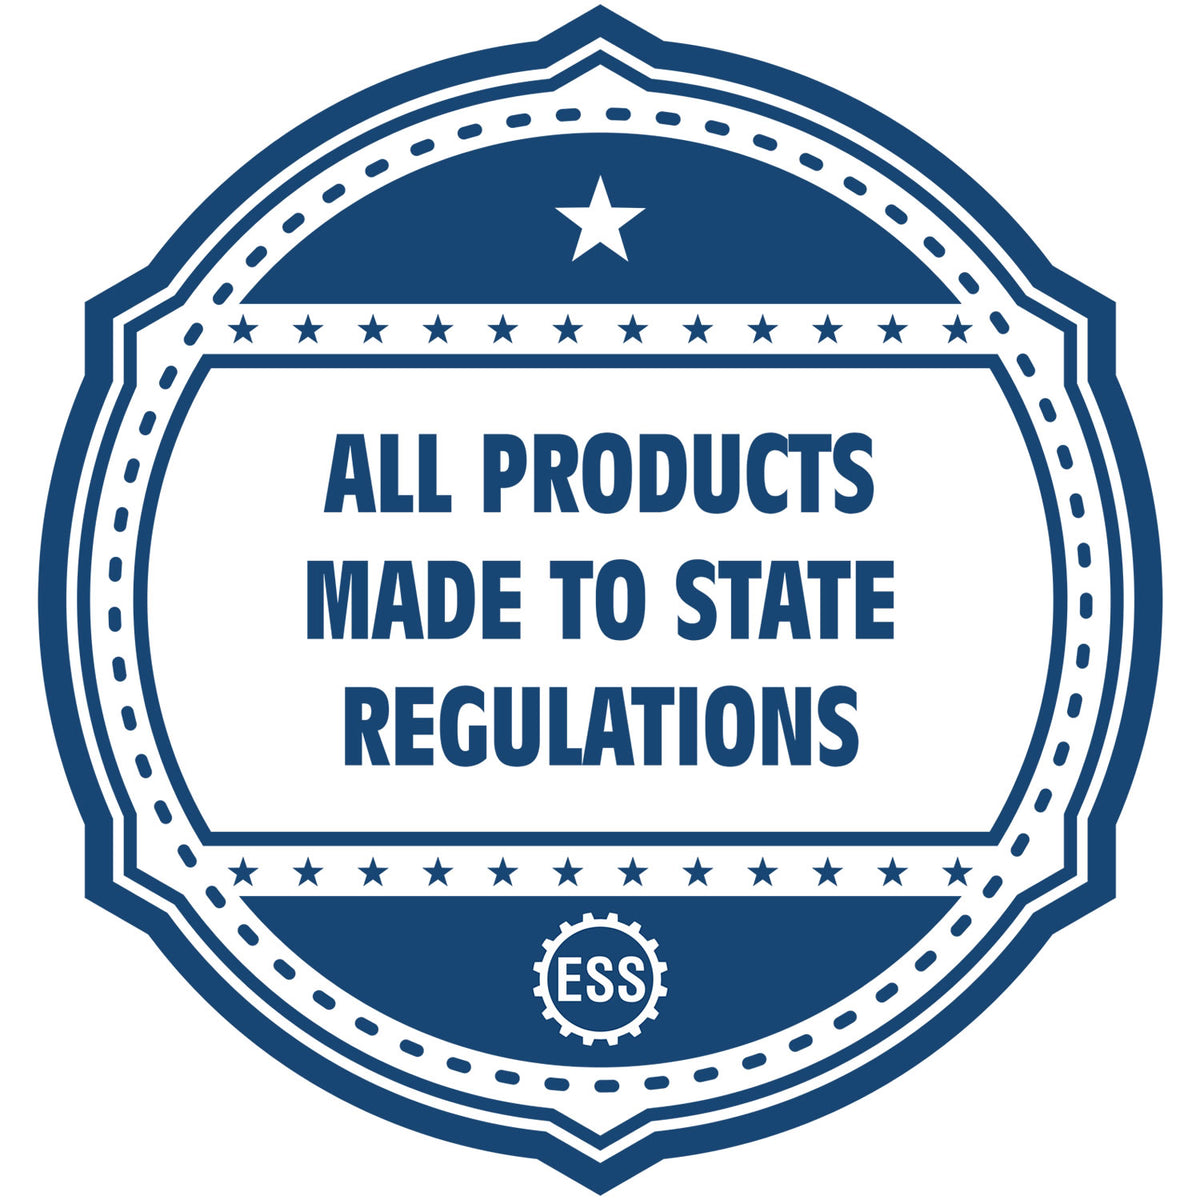 An icon or badge element for the Slim Pre-Inked Kansas Land Surveyor Seal Stamp showing that this product is made in compliance with state regulations.